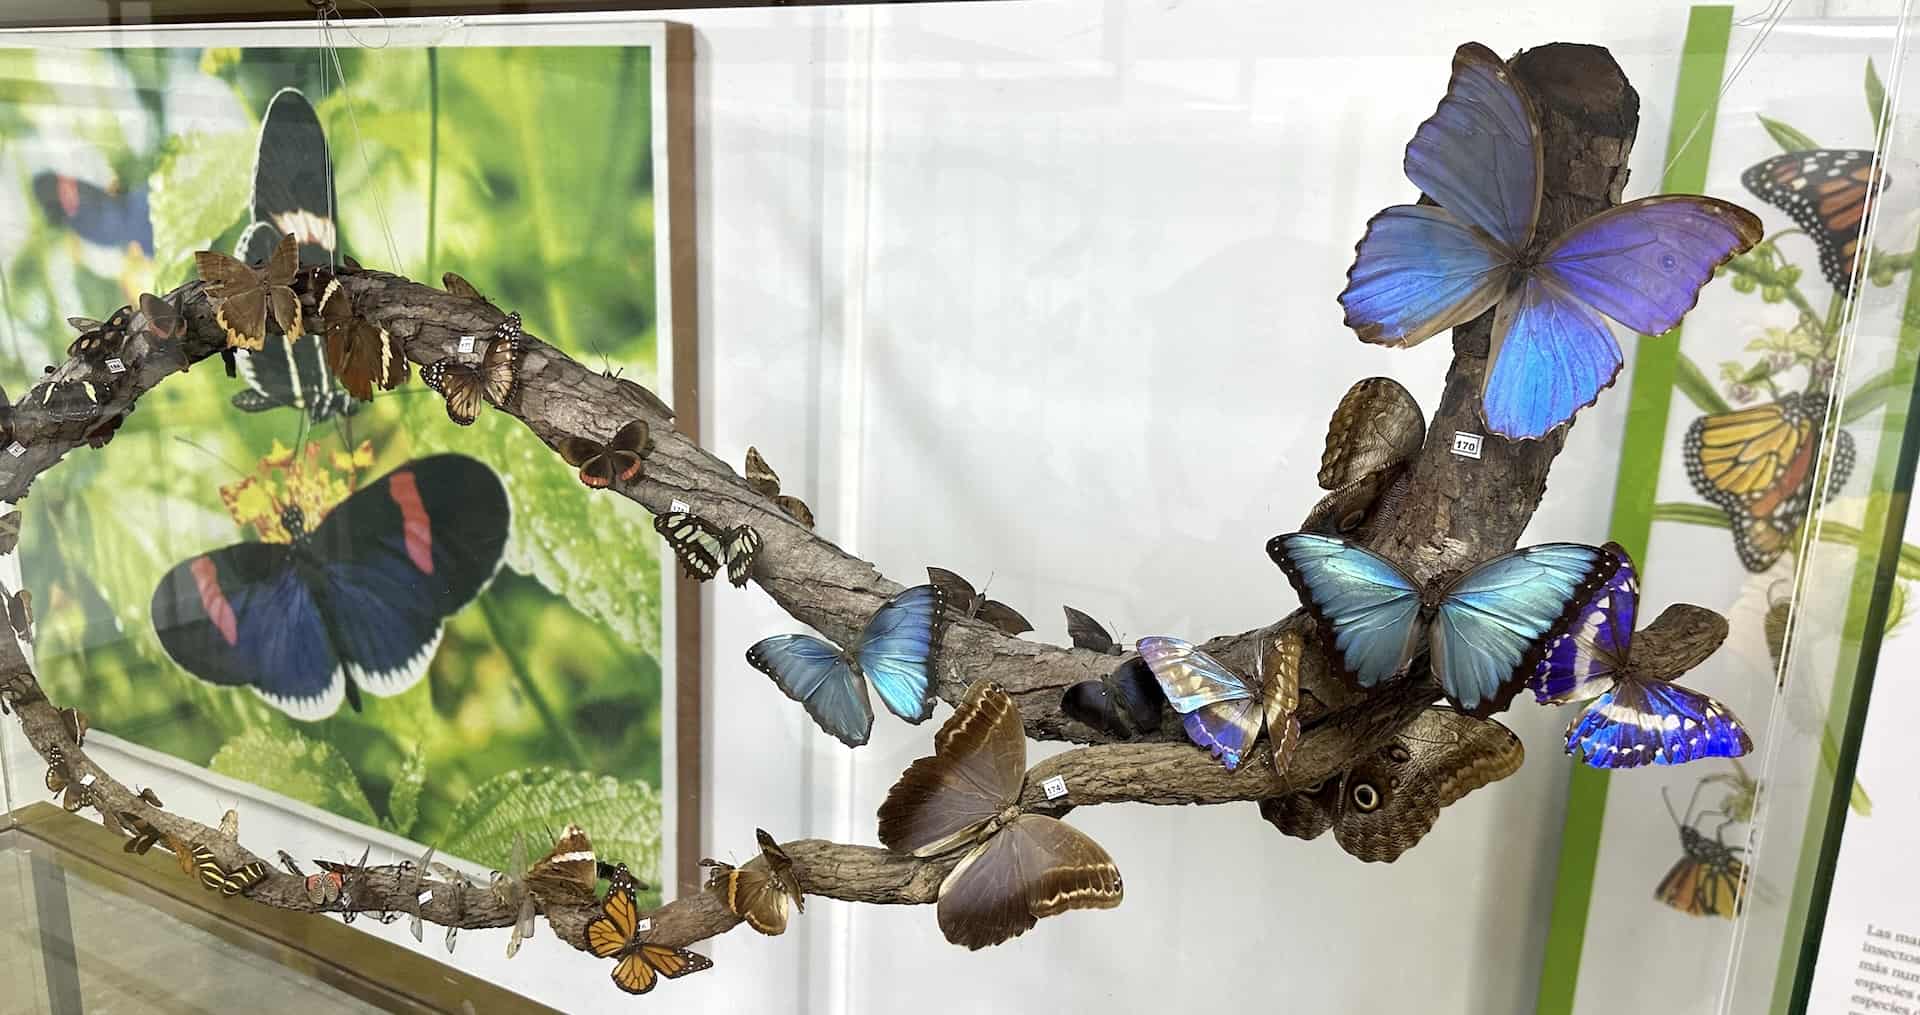 Butterflies of Colombia at the Insectarium